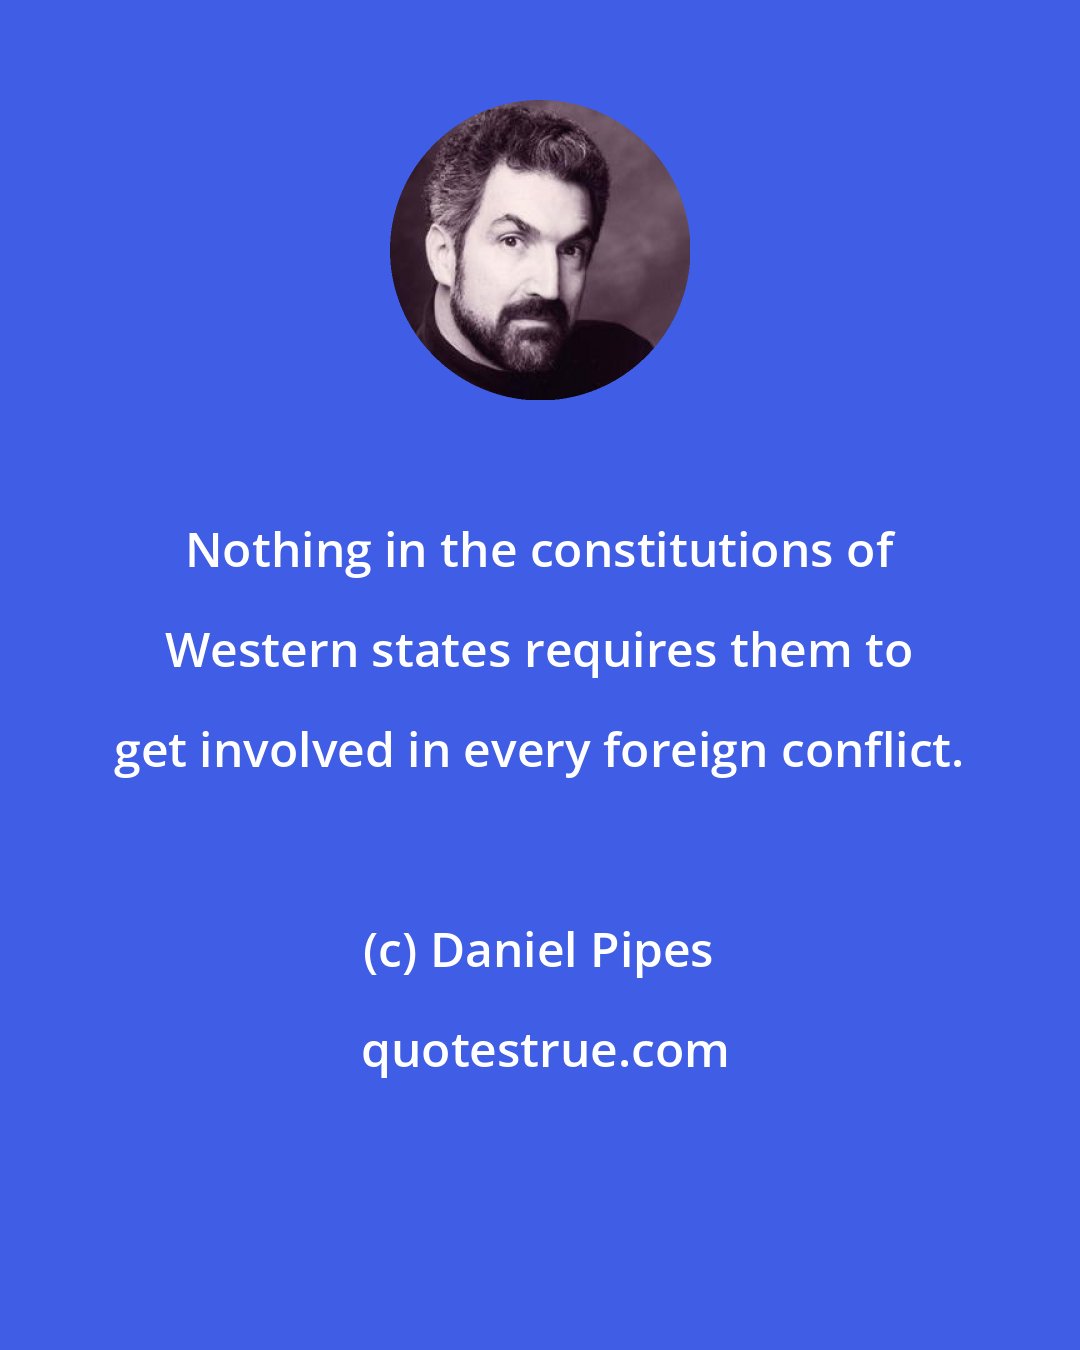 Daniel Pipes: Nothing in the constitutions of Western states requires them to get involved in every foreign conflict.